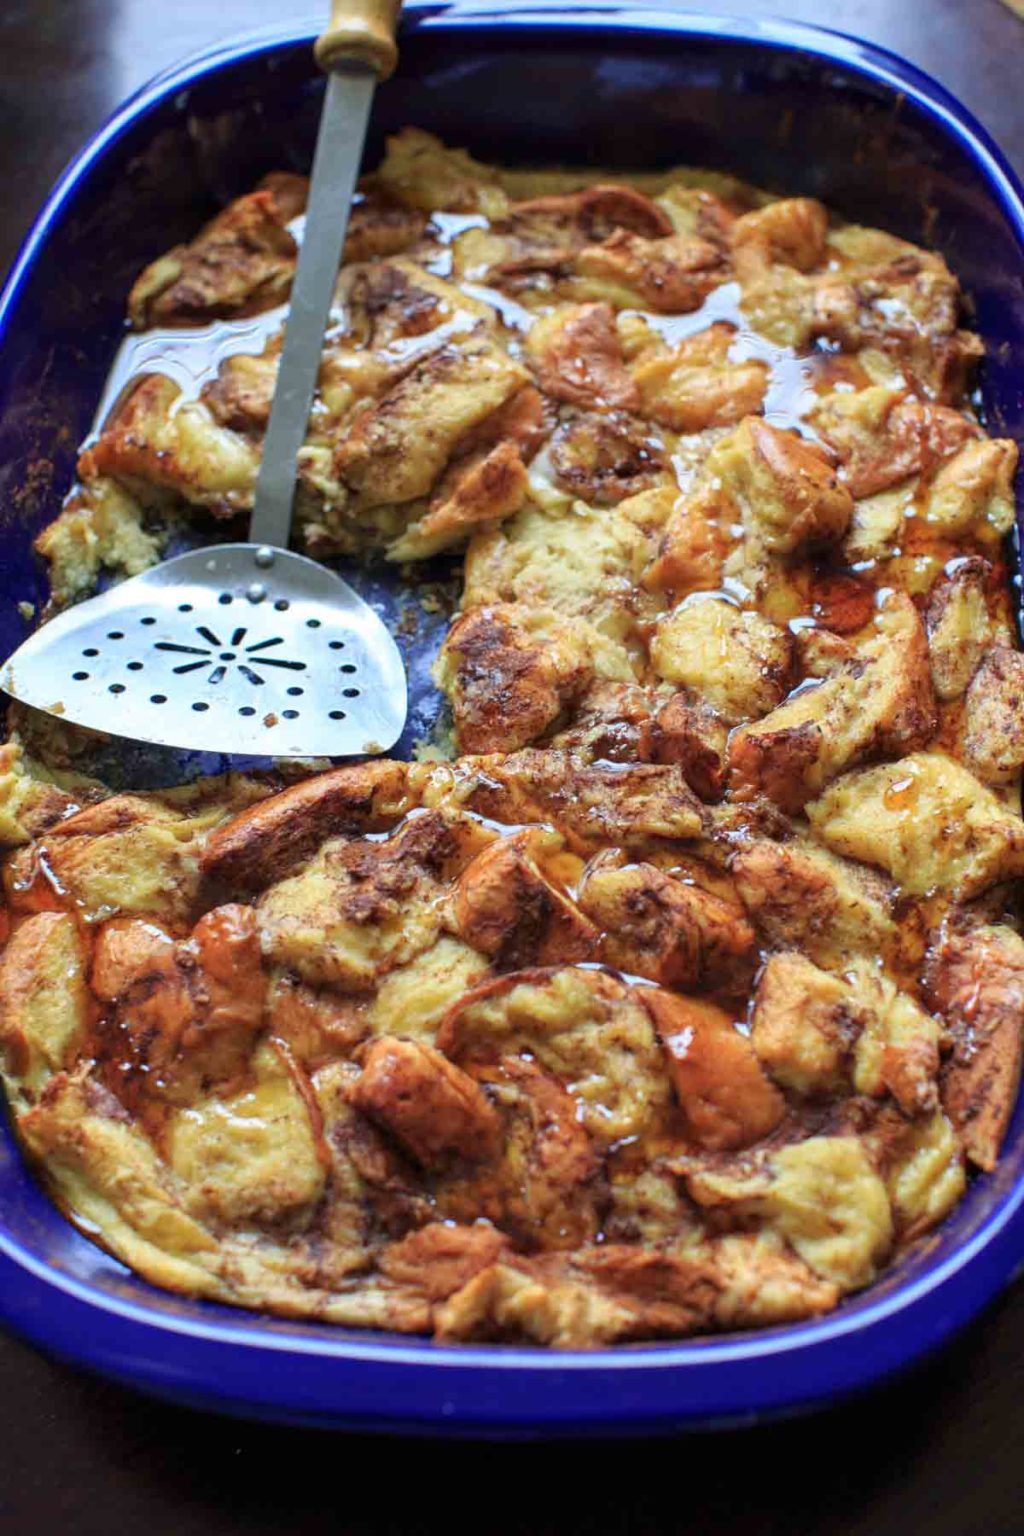 Overnight French Toast Casserole in baking dish with spatula